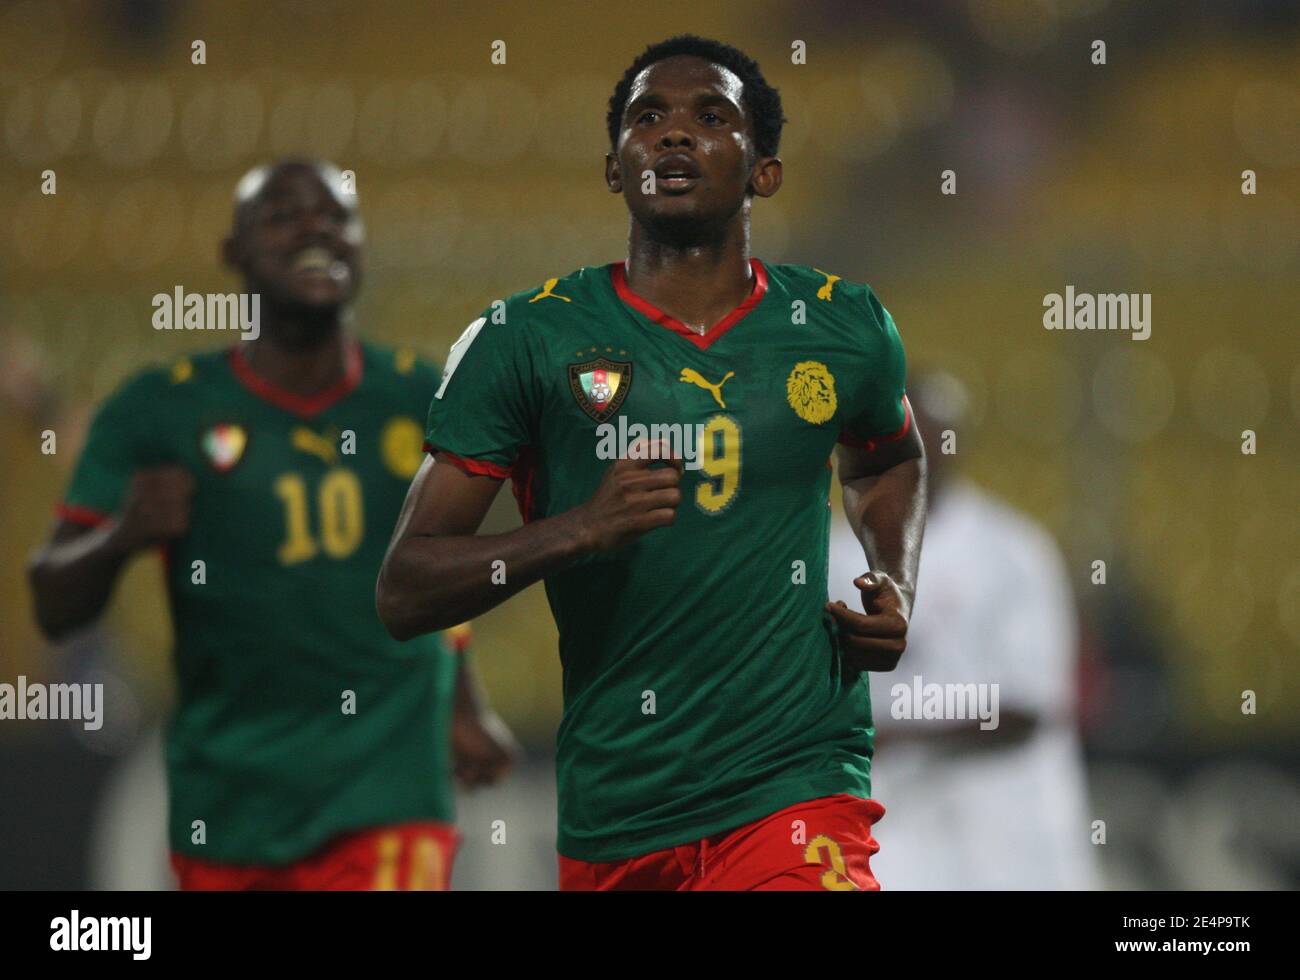 Cameroon's Samuel Eto'o during the African Cup of Nations soccer match, Cameroon vs Zambia in Kumasi, Ghana on January 26, 2008. Cameroon won the match 5-1. Photo by Steeve McMay/Cameleon/ABACAPRESS.COM Stock Photo